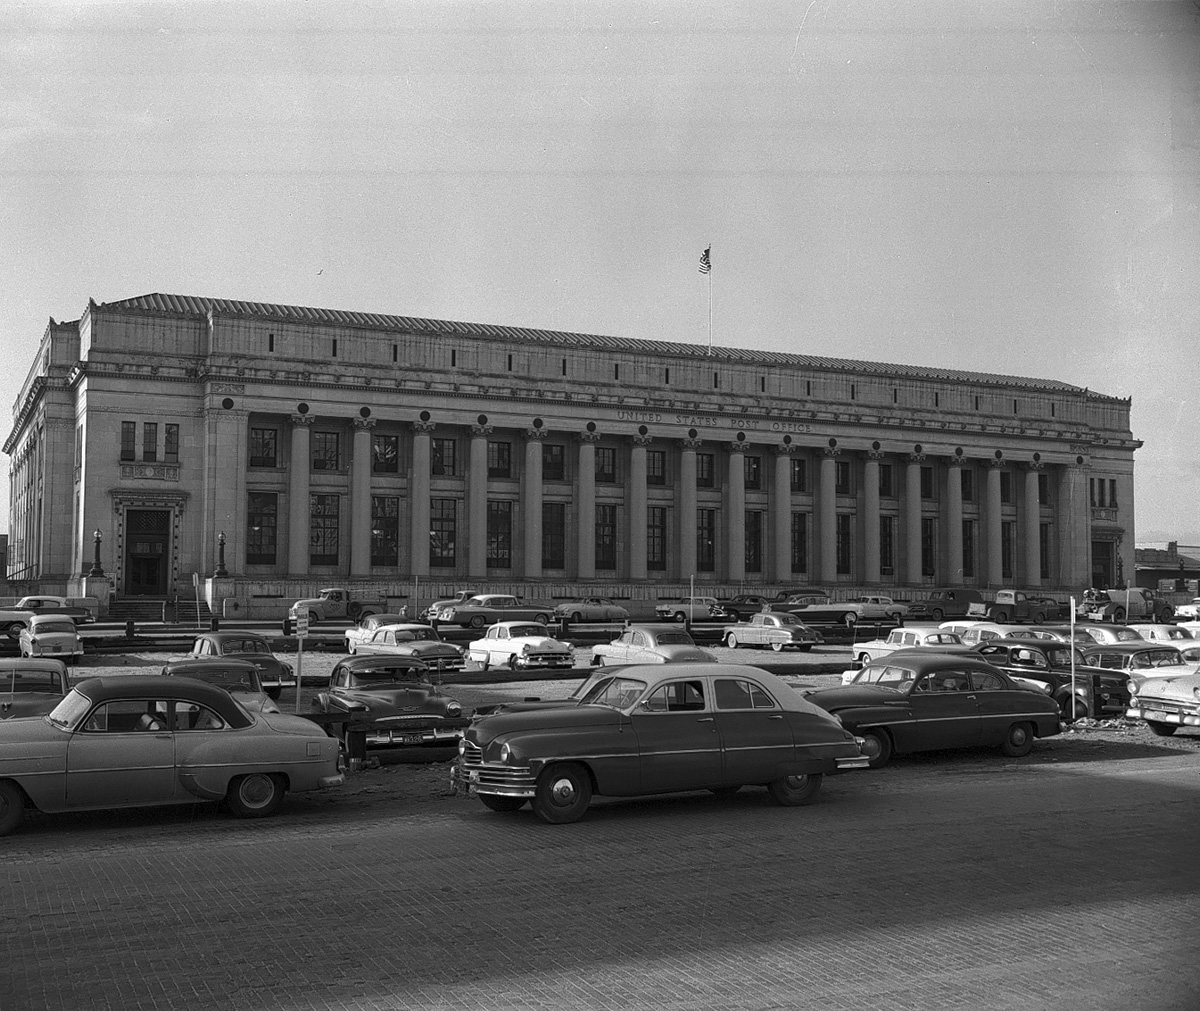 image with 1950s era cars in the foreground and the Fort Worth US Post Office in the background in grayscale.